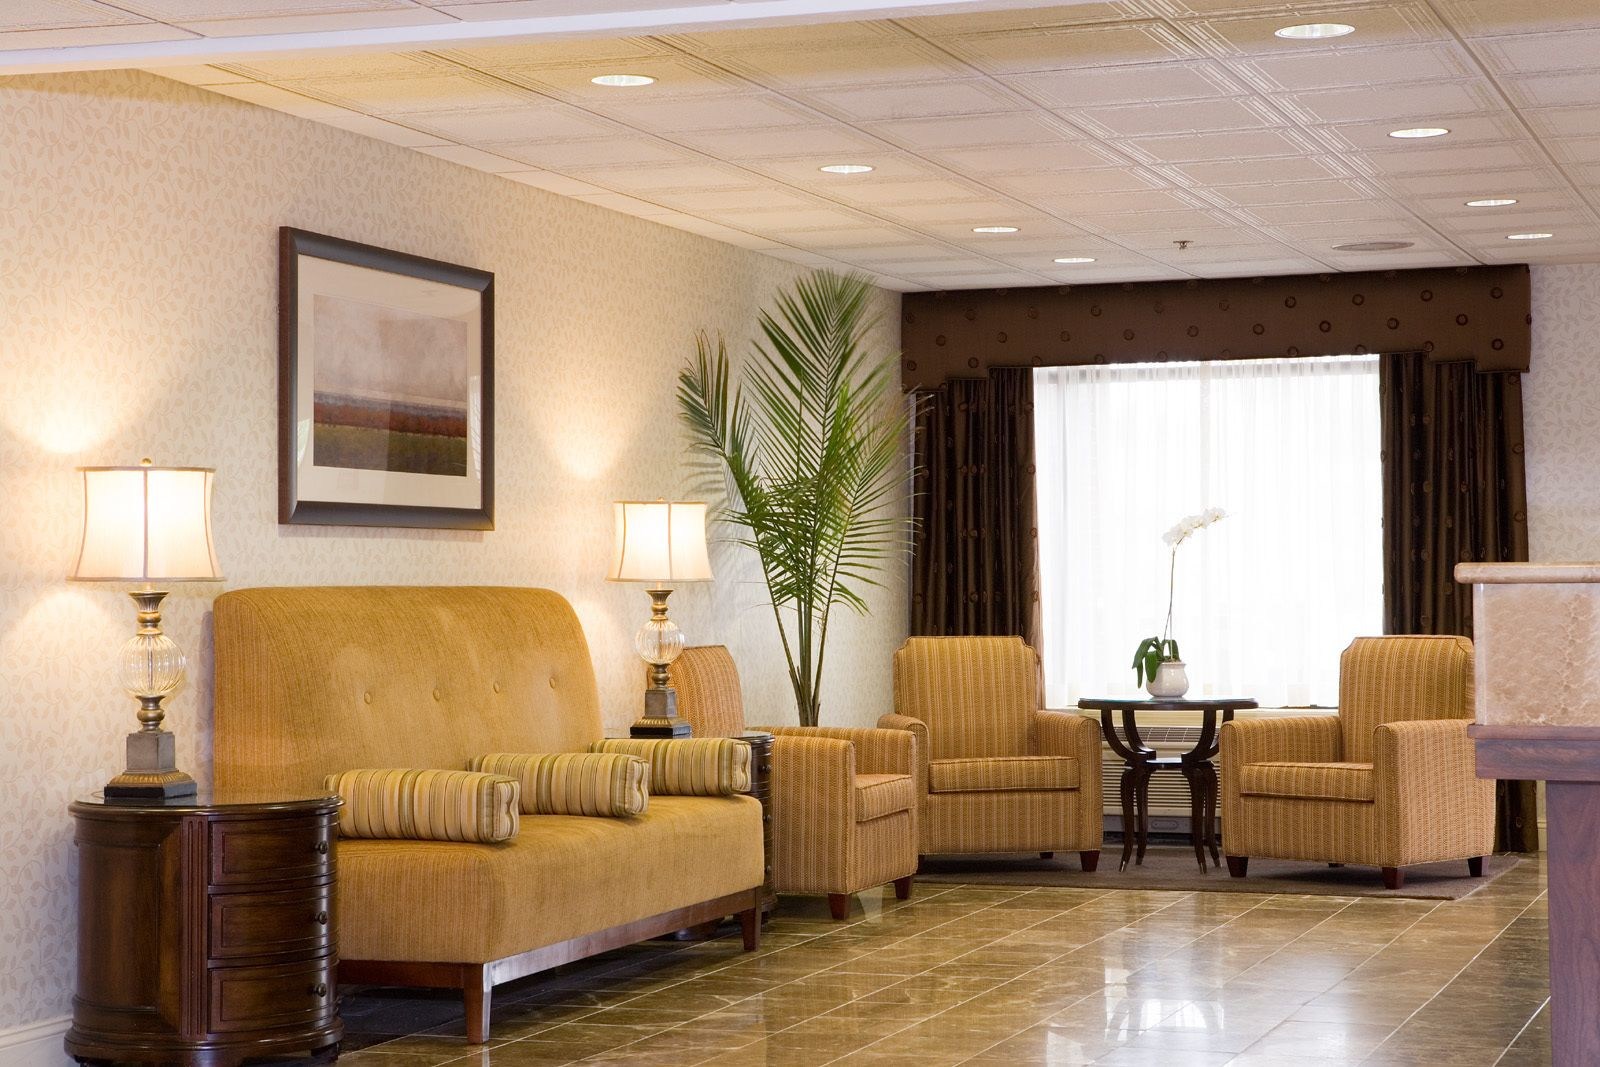 Radisson Hotel & Suites Chelmsford-Lowell